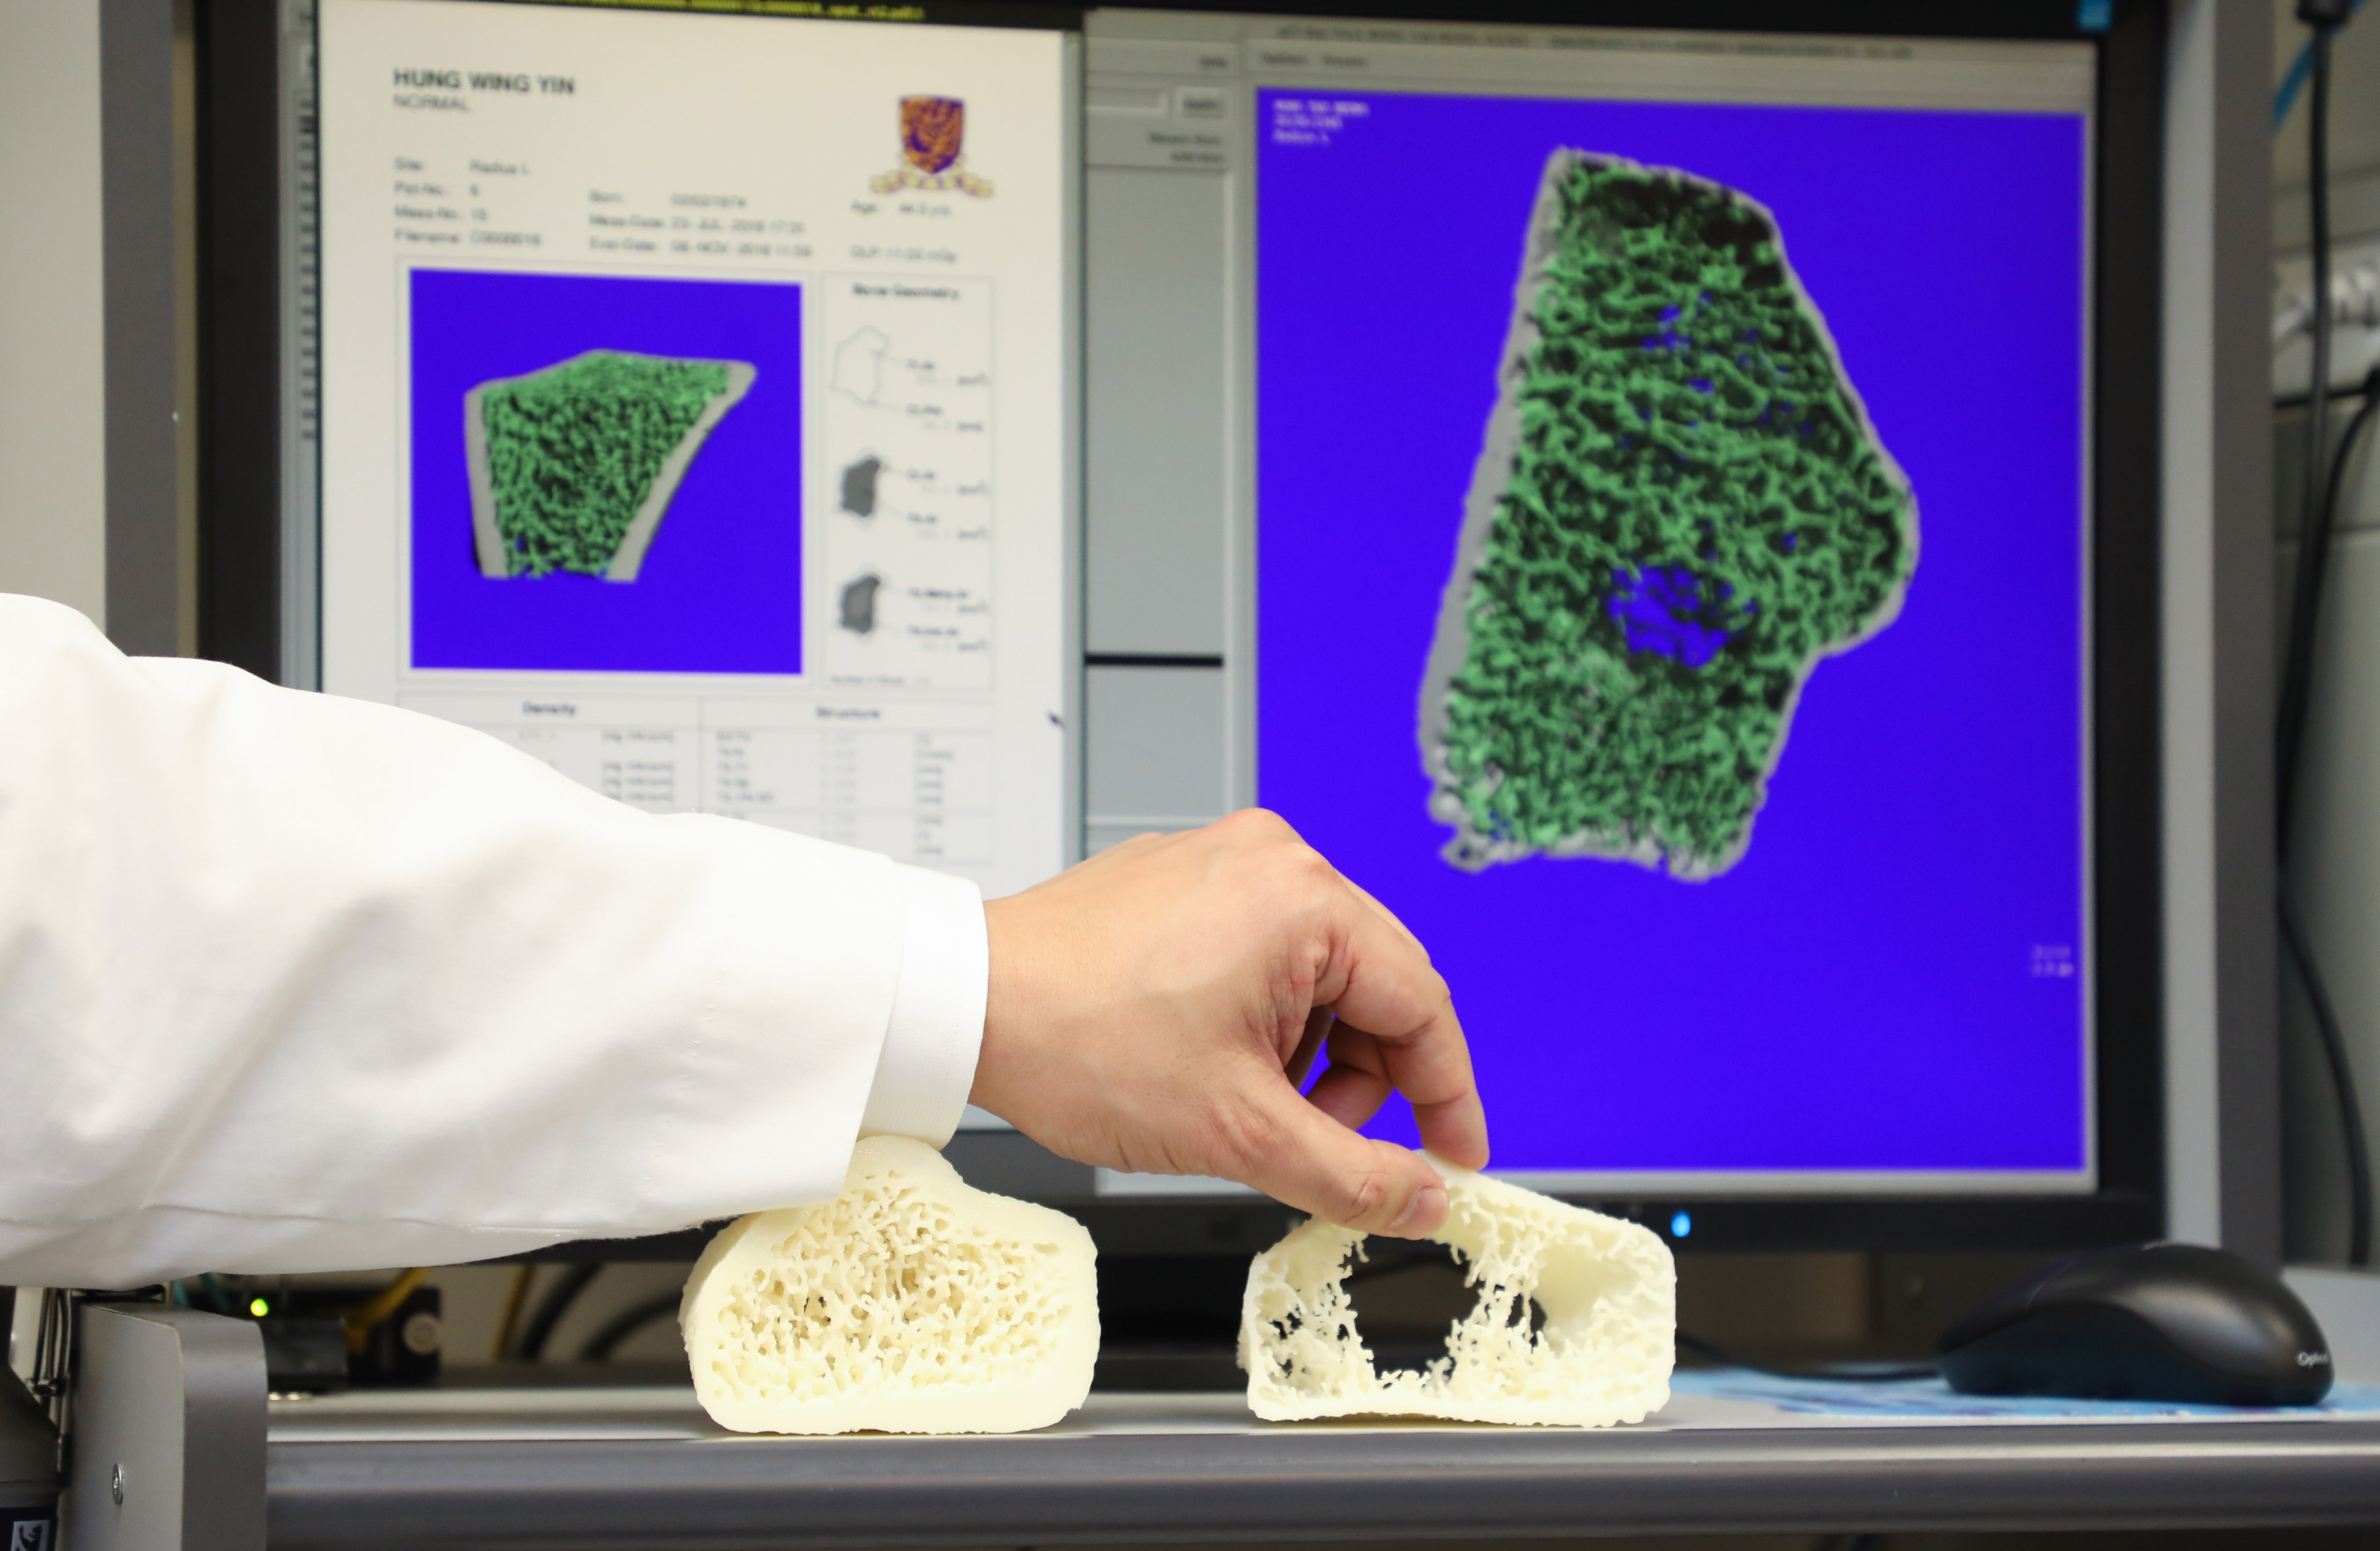 The 3D imaging device HR-pQCT uses scanning technology to perform precise analysis of the bone micro-architecture and trabecular connectivity to measure bone strength.